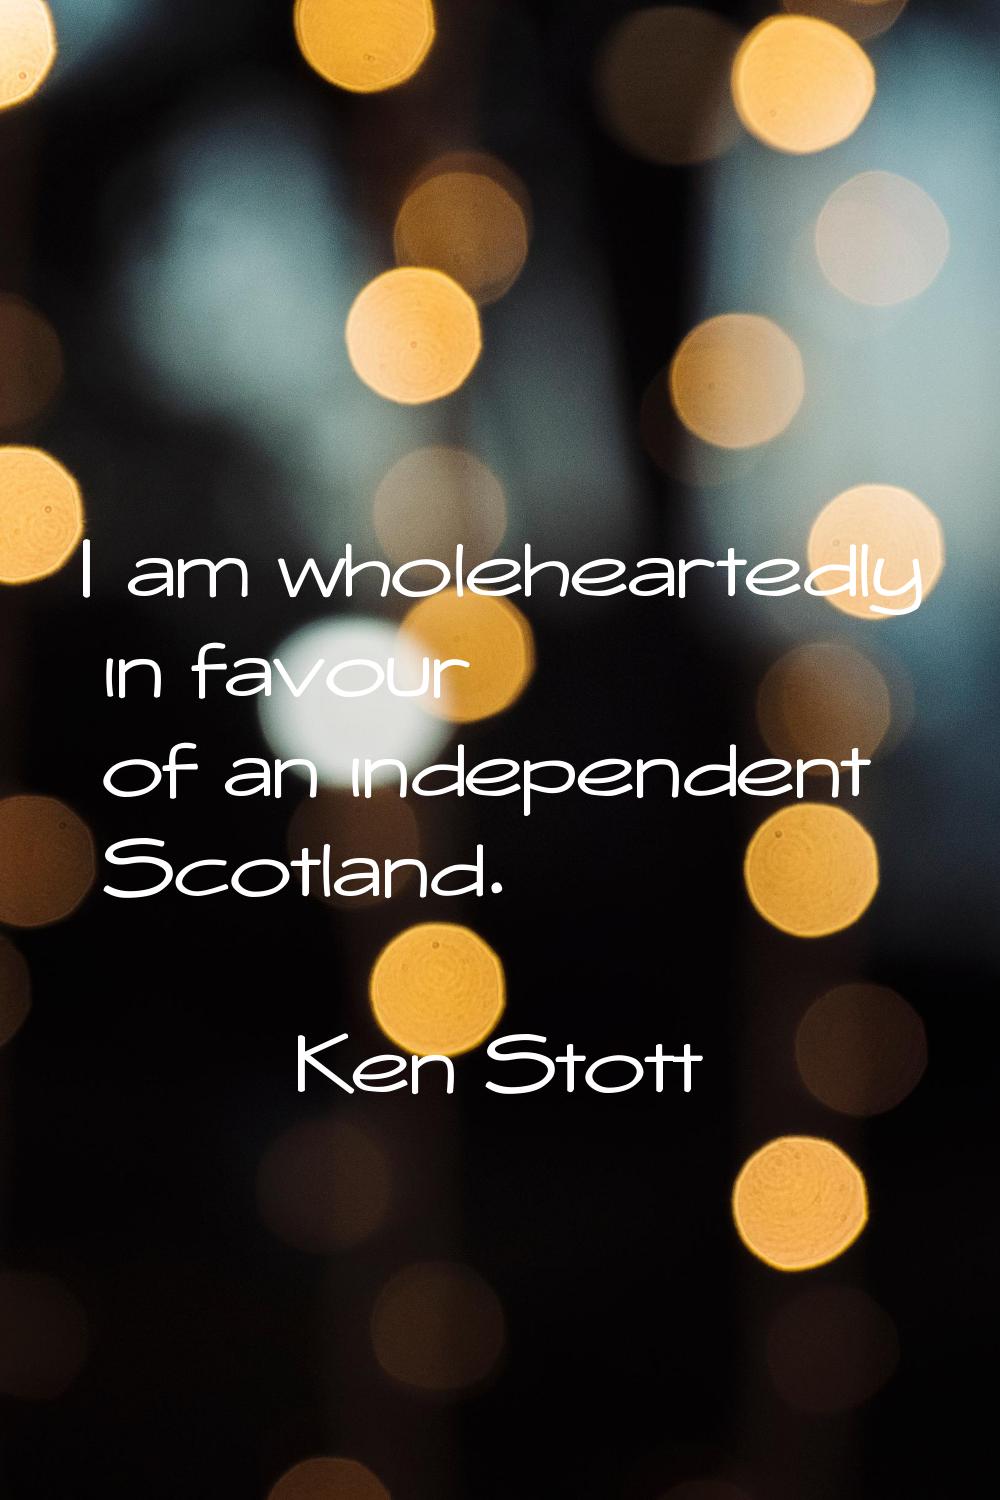 I am wholeheartedly in favour of an independent Scotland.